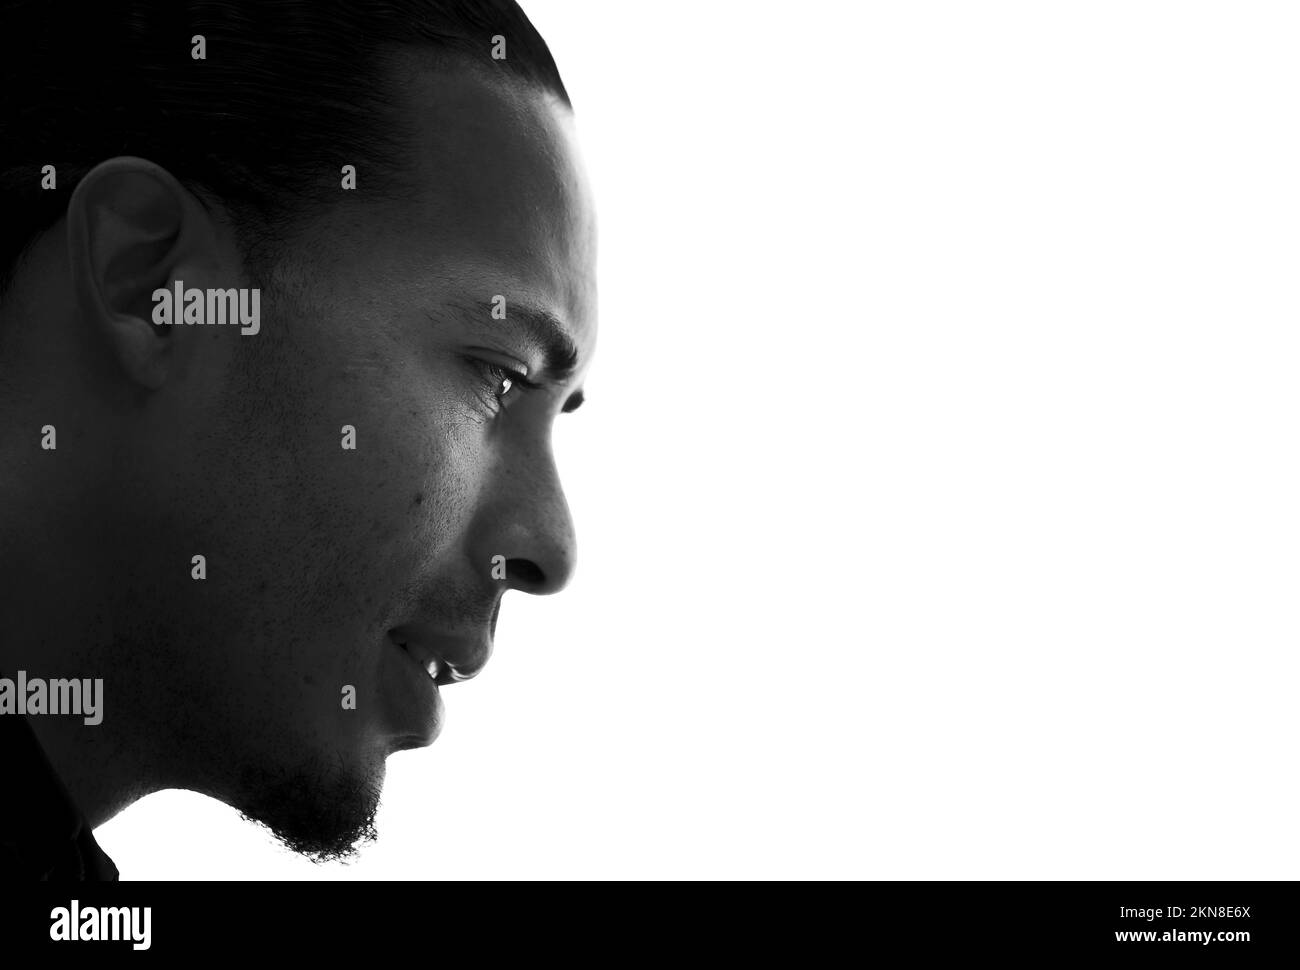 DOHA - Virgil van Dijk of Holland during a media meeting of the Dutch national team during the World Cup football. ANP KOEN VAN WEEL netherlands out - belgium out Stock Photo